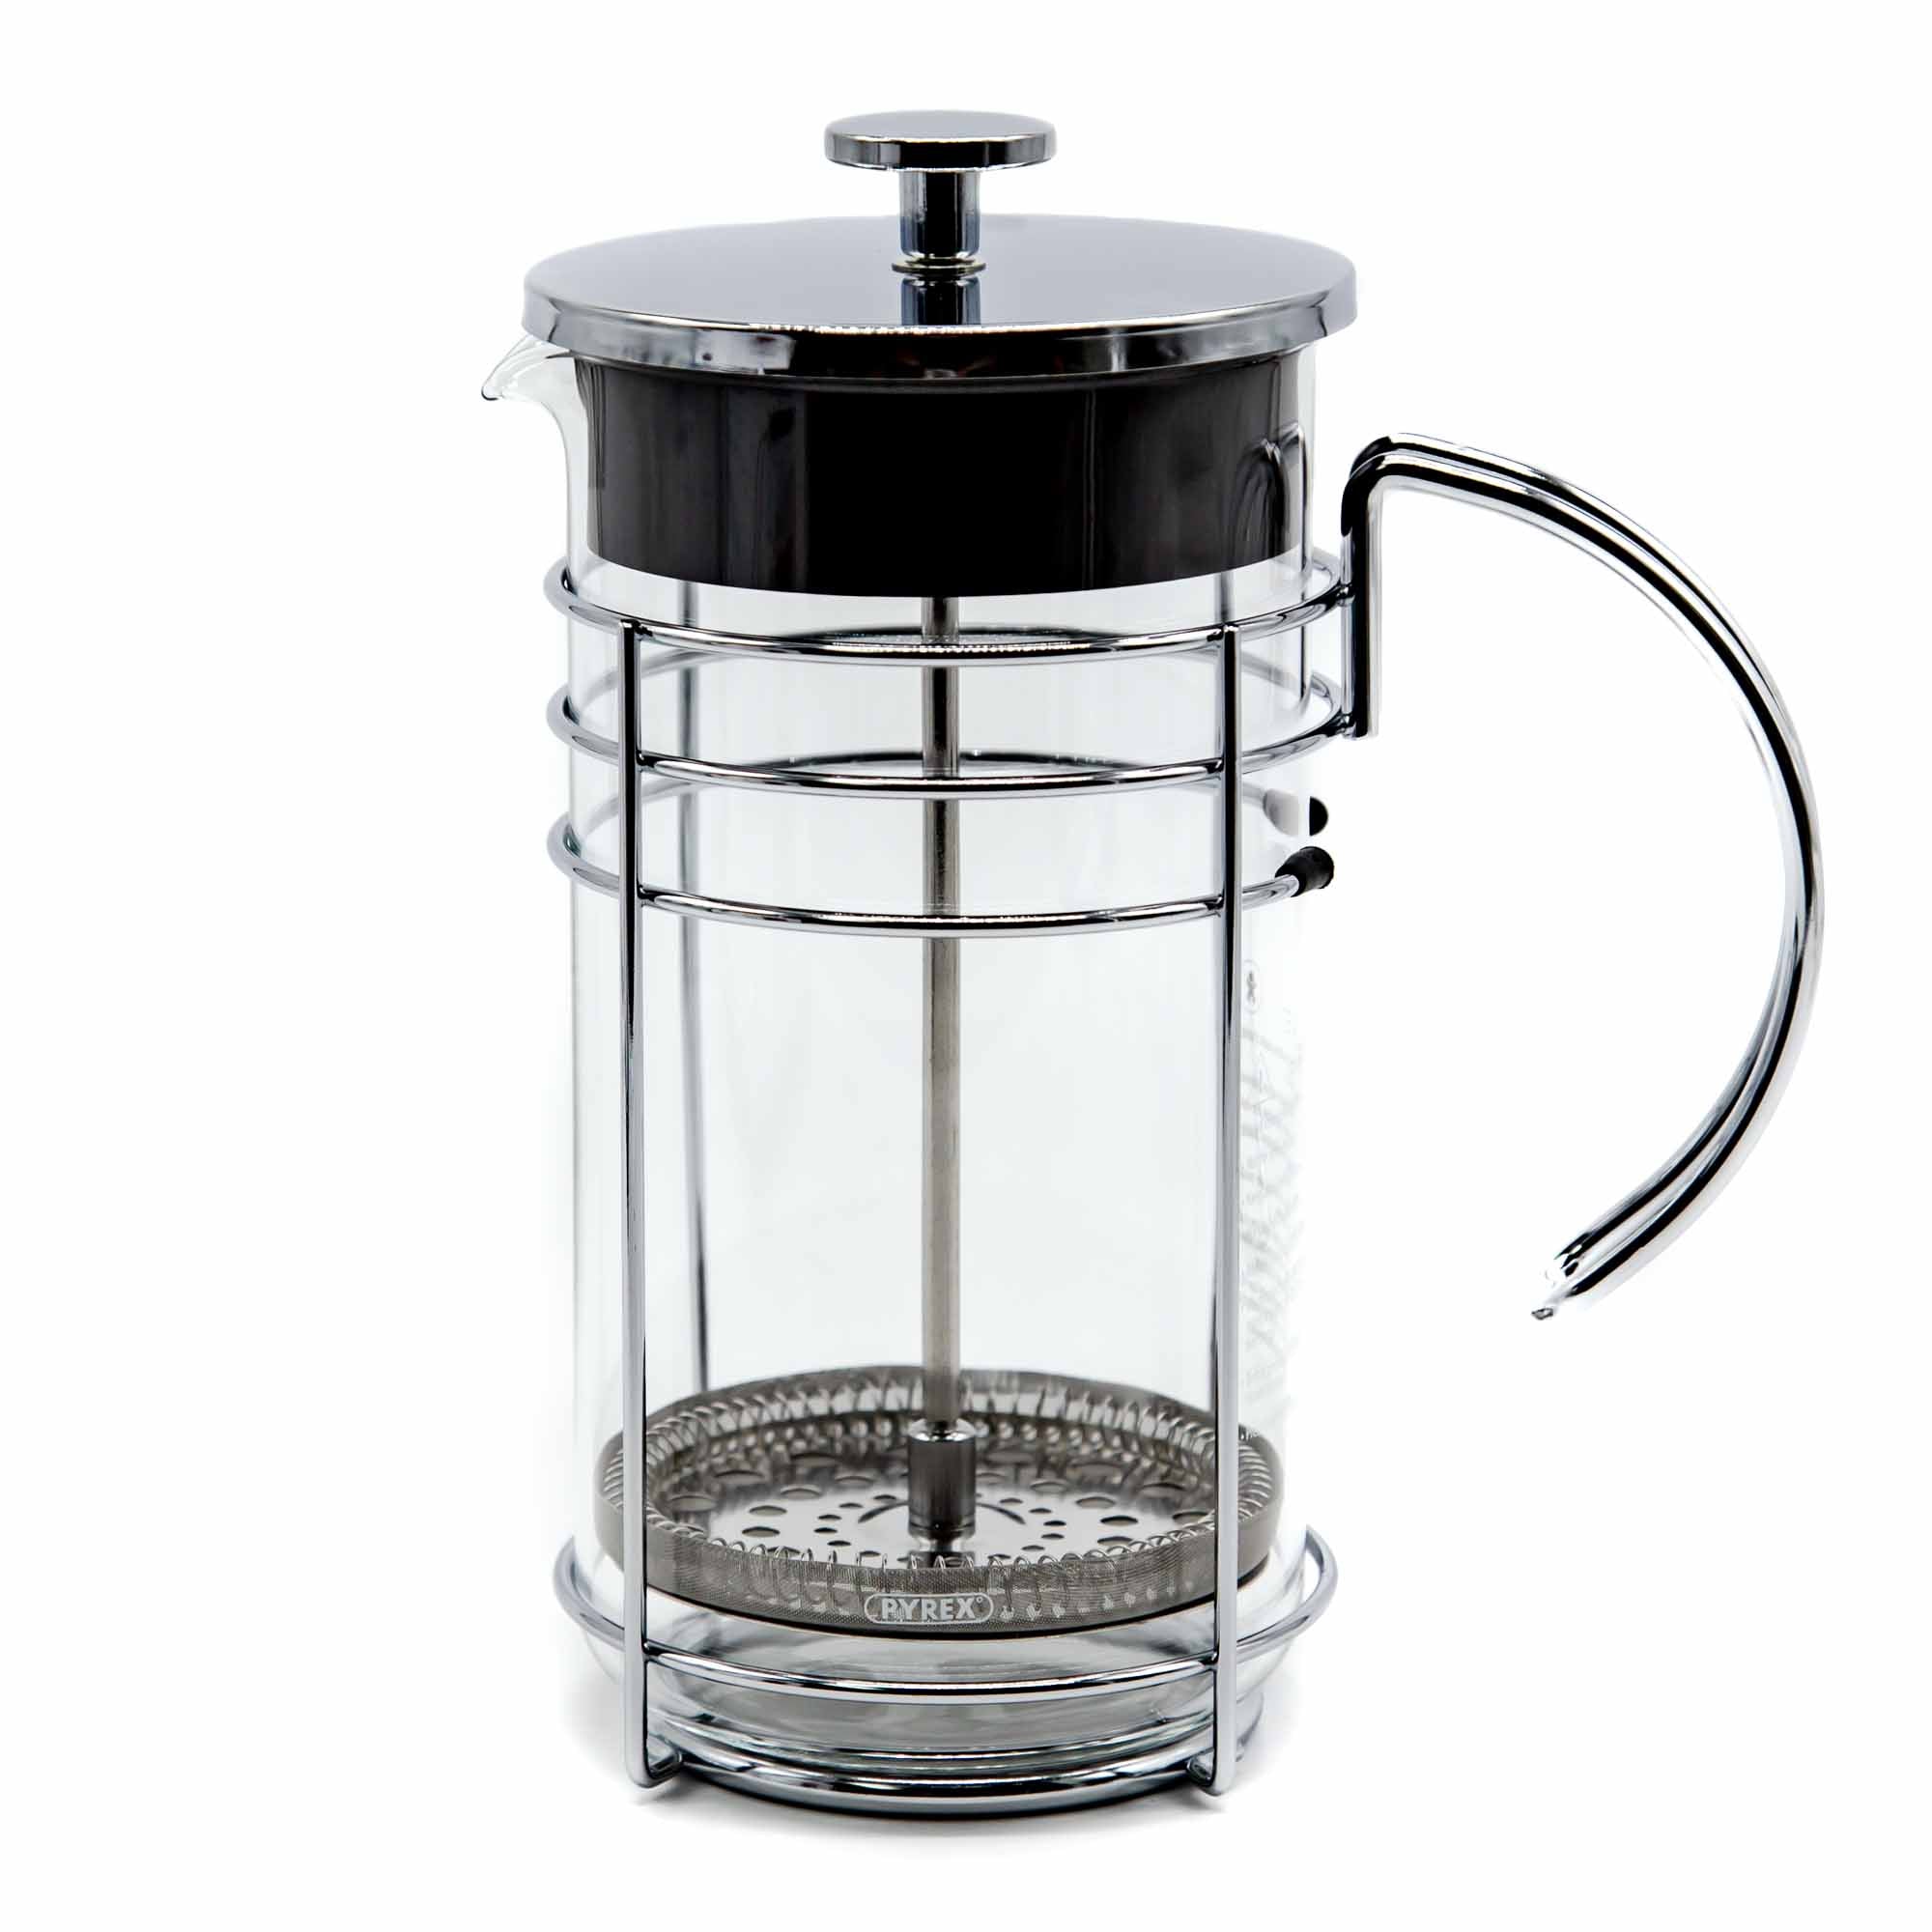 GROSCHE Dublin Stainless Steel Coffee Maker French Press - 8 Cup | 34 FL Oz  Capacity Coffee Press, 18/8 Double Walled Stainless Steel French Press